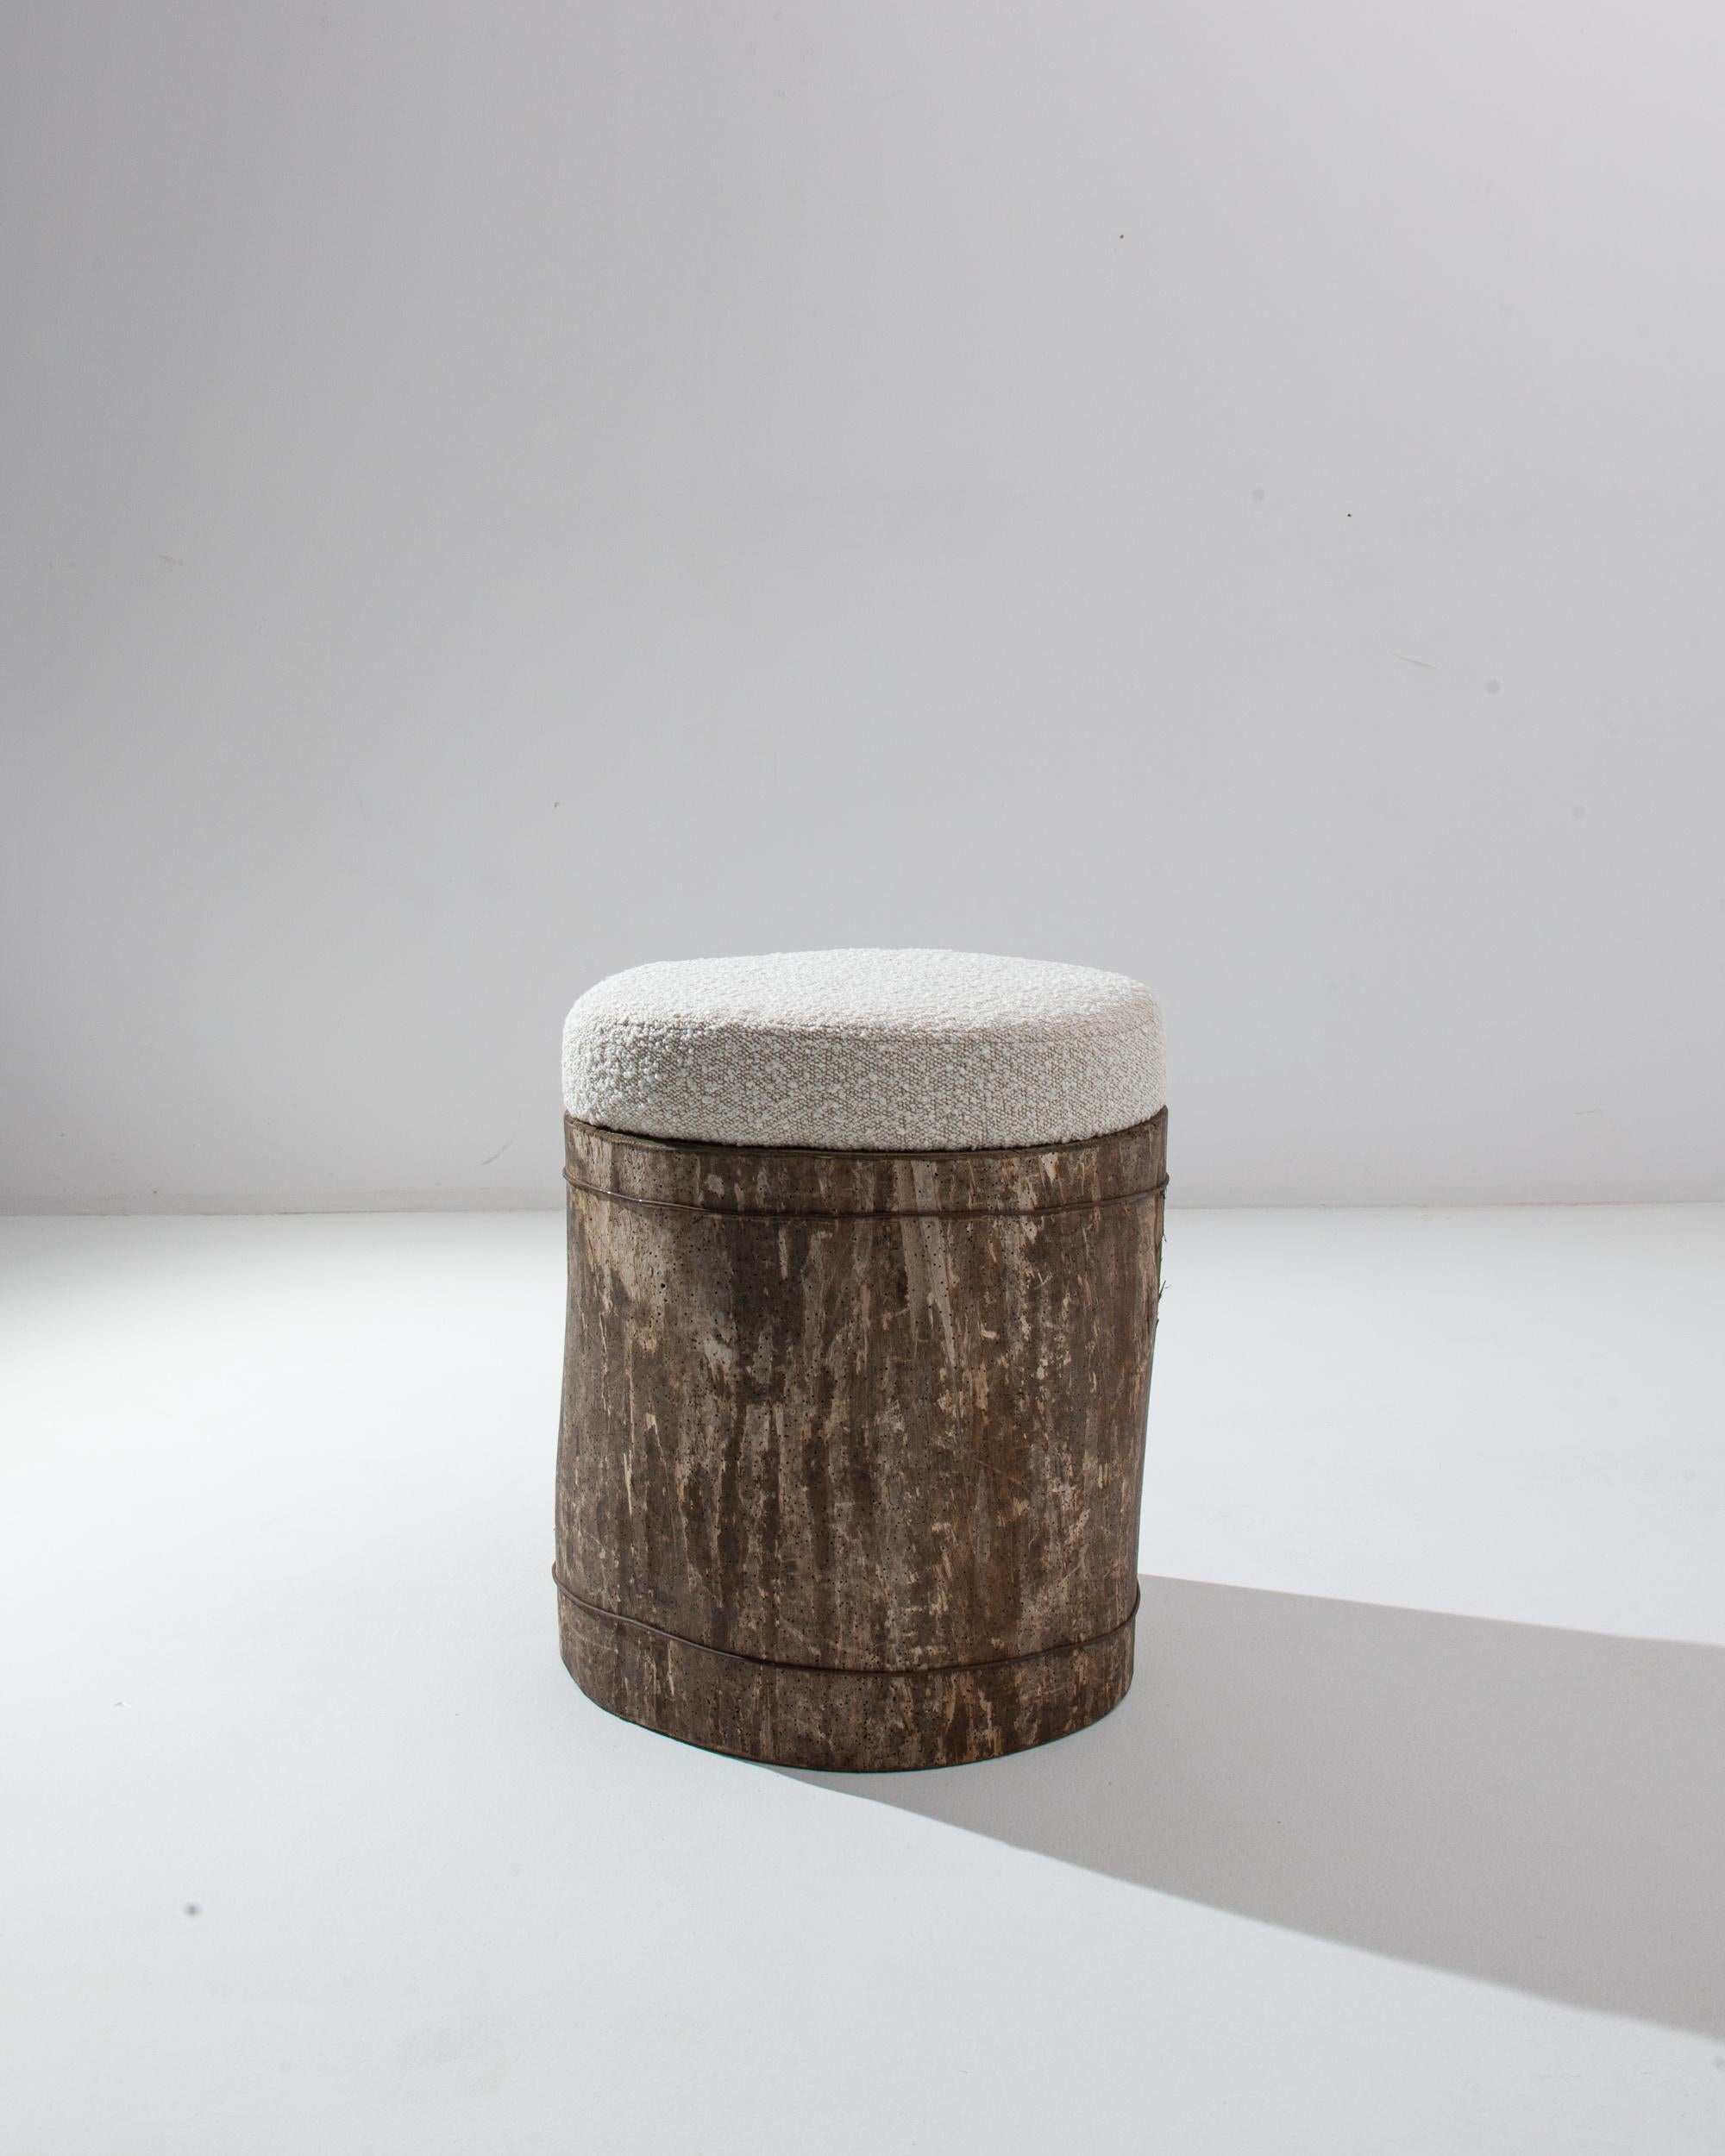 A wooden and upholstered ottoman from 19th century Central Europe. This refreshingly minimal stool is composed of a thick cut of tree trunk wrapped in wire and topped with fresh boucle reupholstery. Providing both a refined elegance and a breath of